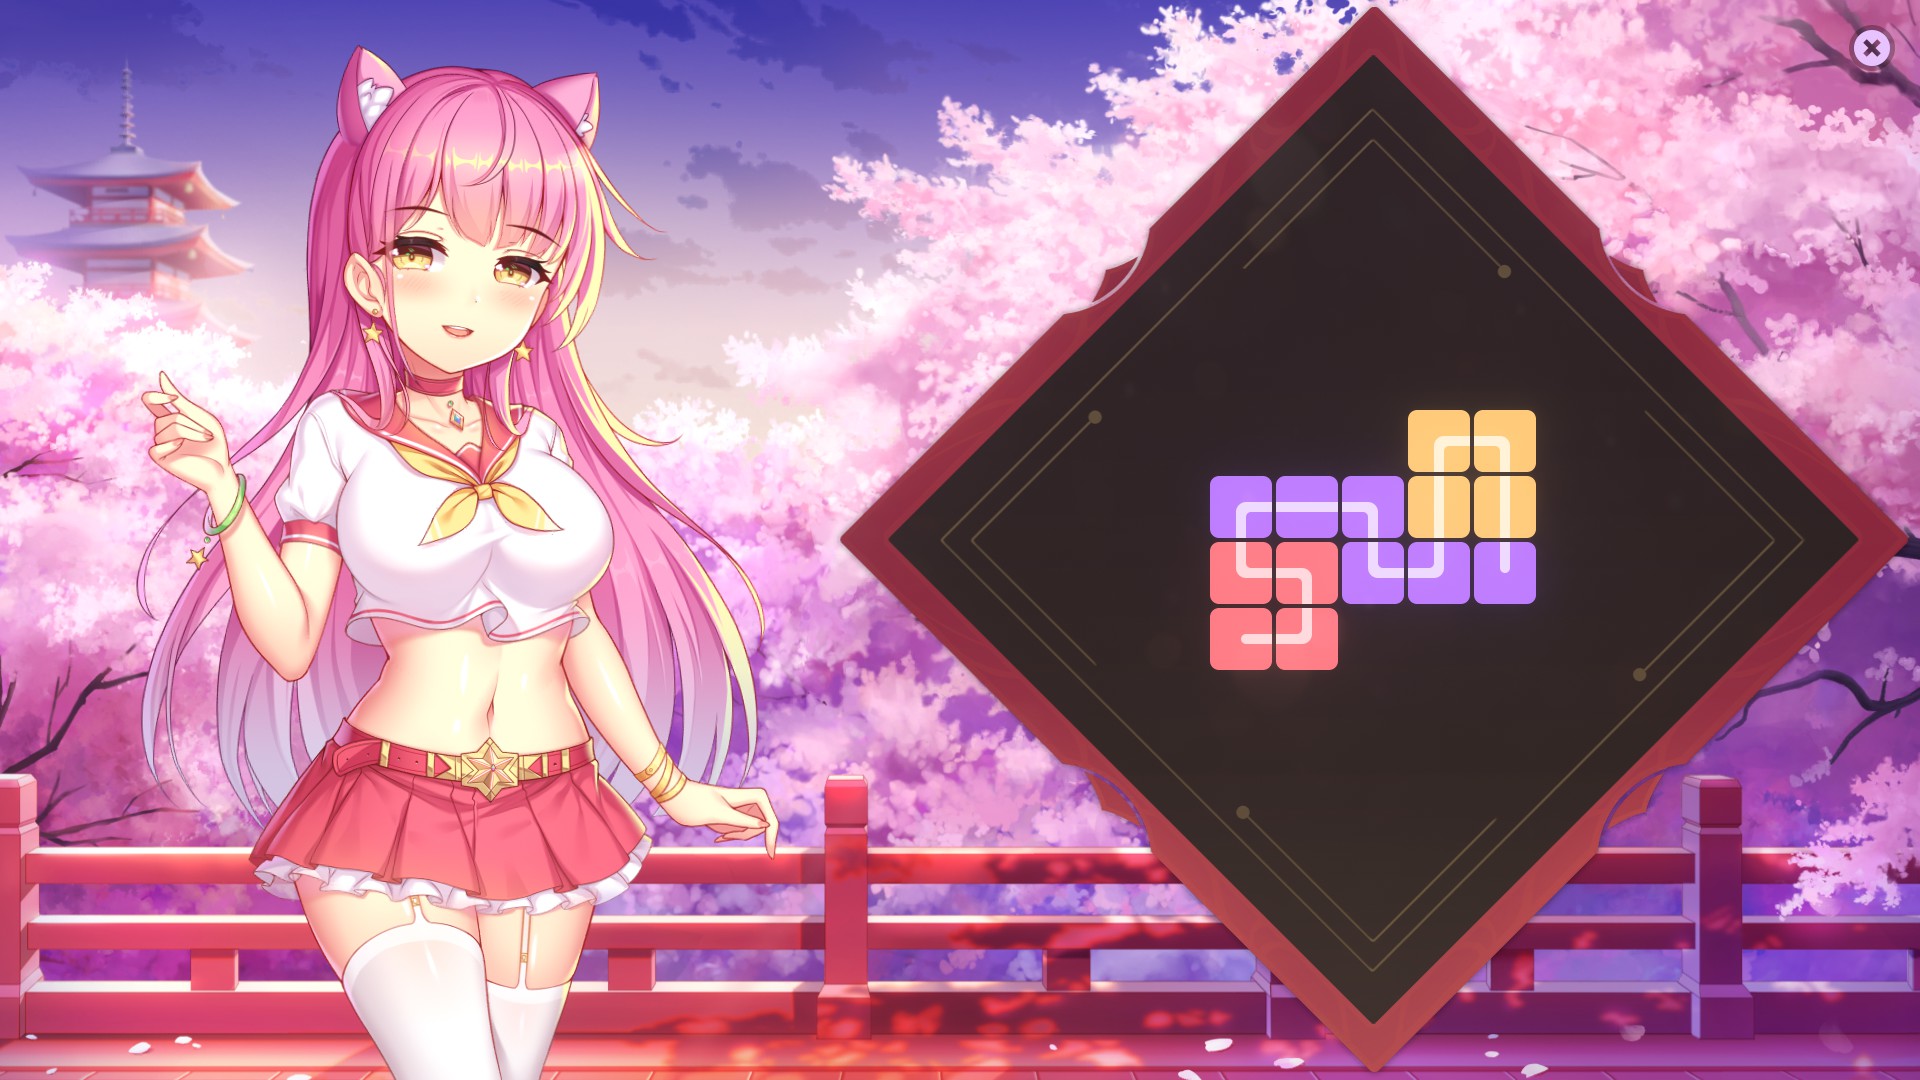 Sakura Hime 2 - Complete Achievement Guide +Walkthrough - Images of completed levels - DA76A02